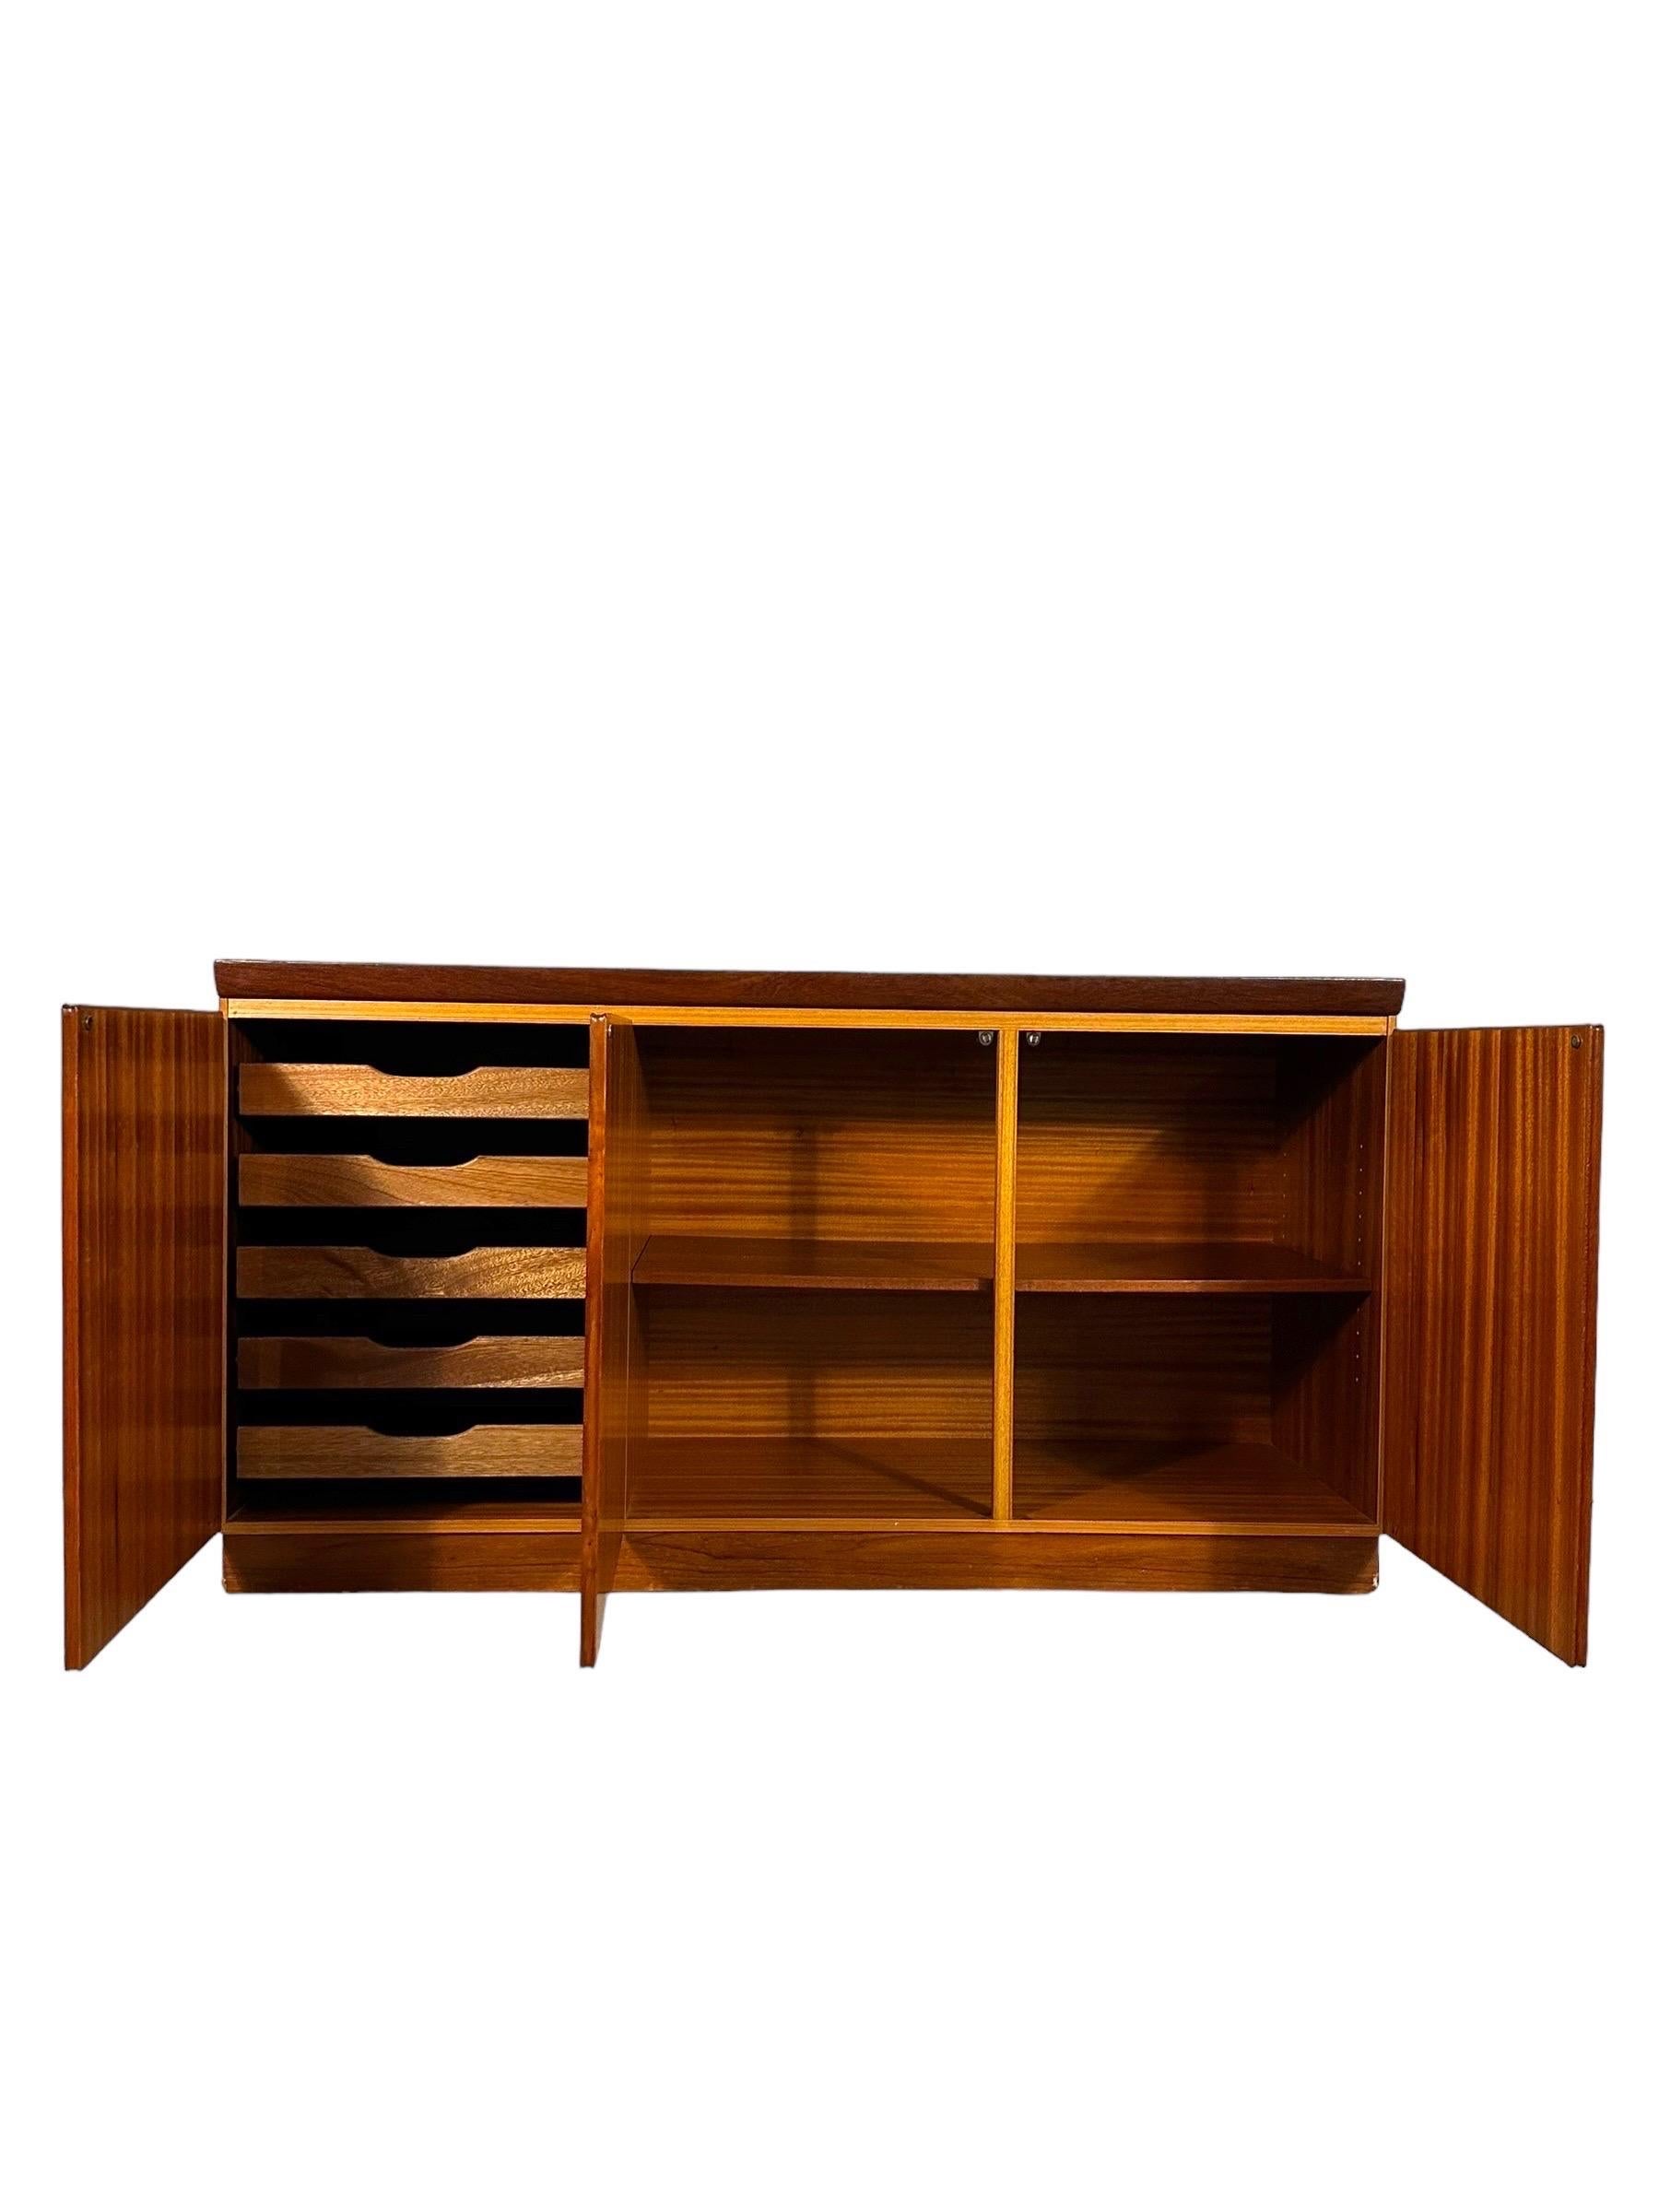 Mid Century Danish Modern Teak Credenza  In Good Condition For Sale In Brooklyn, NY